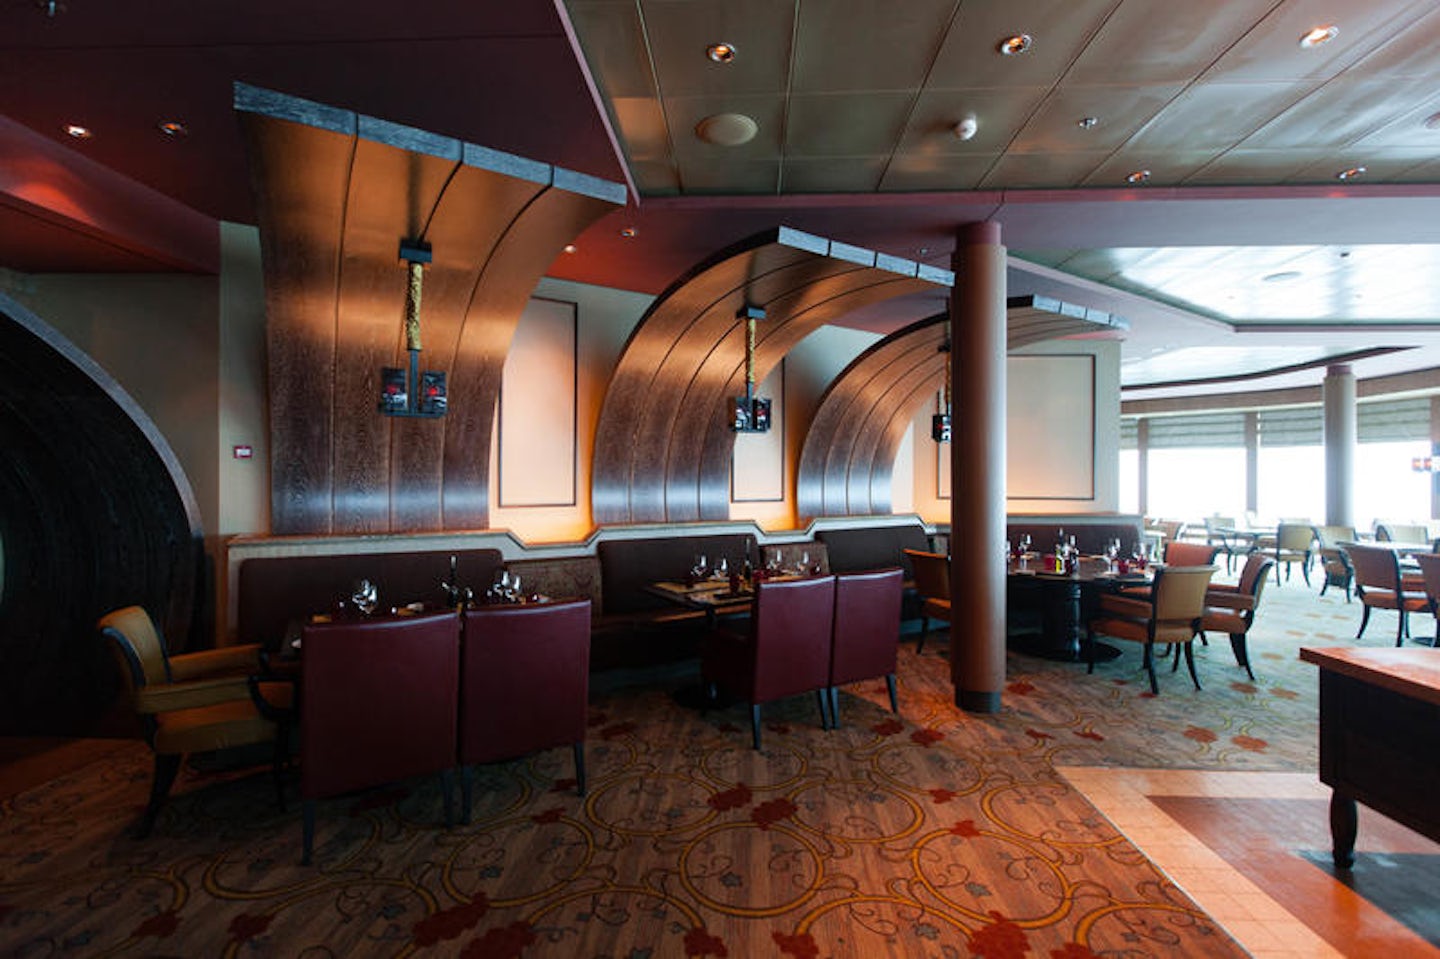 Tuscan Grille on Celebrity Silhouette